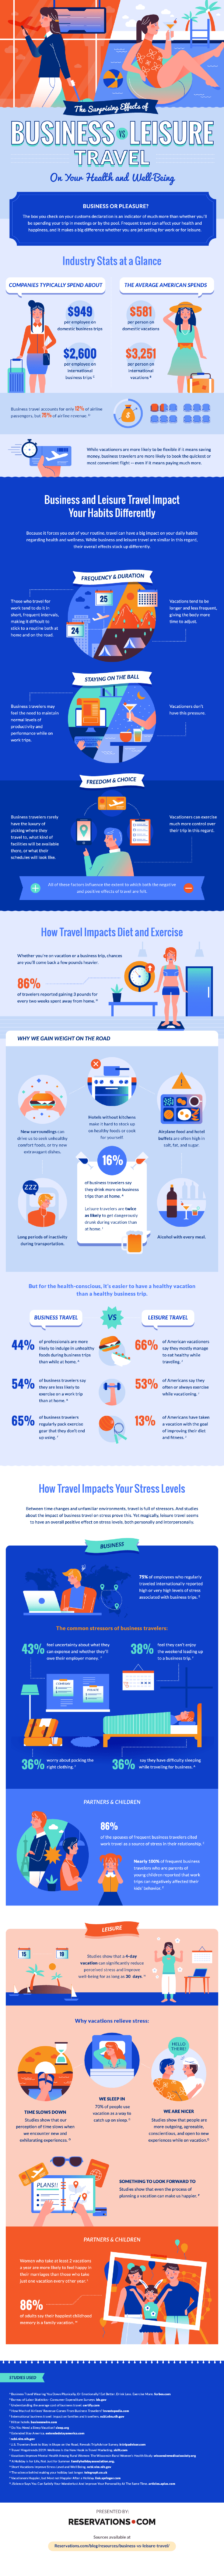 Business or Leisure Travel Infographic